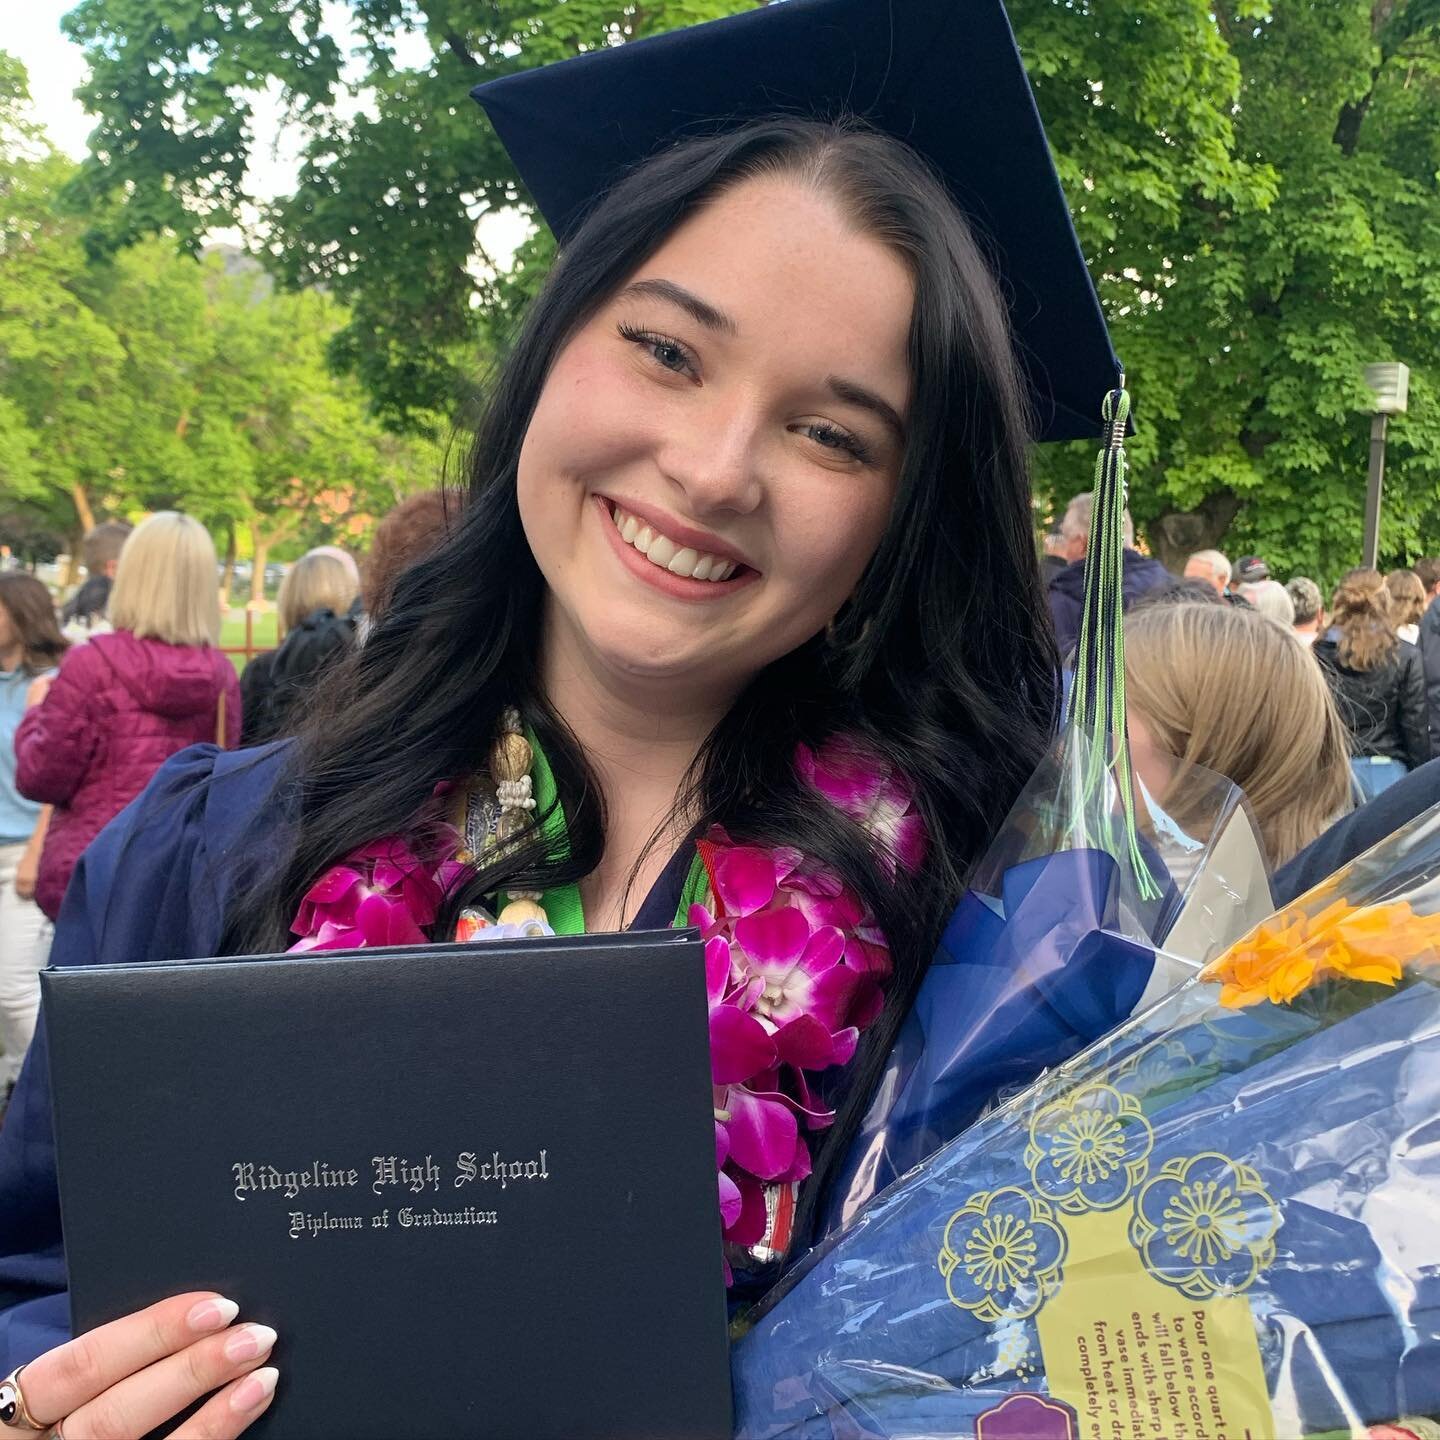 My beautiful Maddie graduated last week from high school. It was so fun to gather with all our kids (and some we&rsquo;ve adopted along the way) to celebrate her. Still can&rsquo;t believe my baby girl is graduated but I&rsquo;m looking forward to se